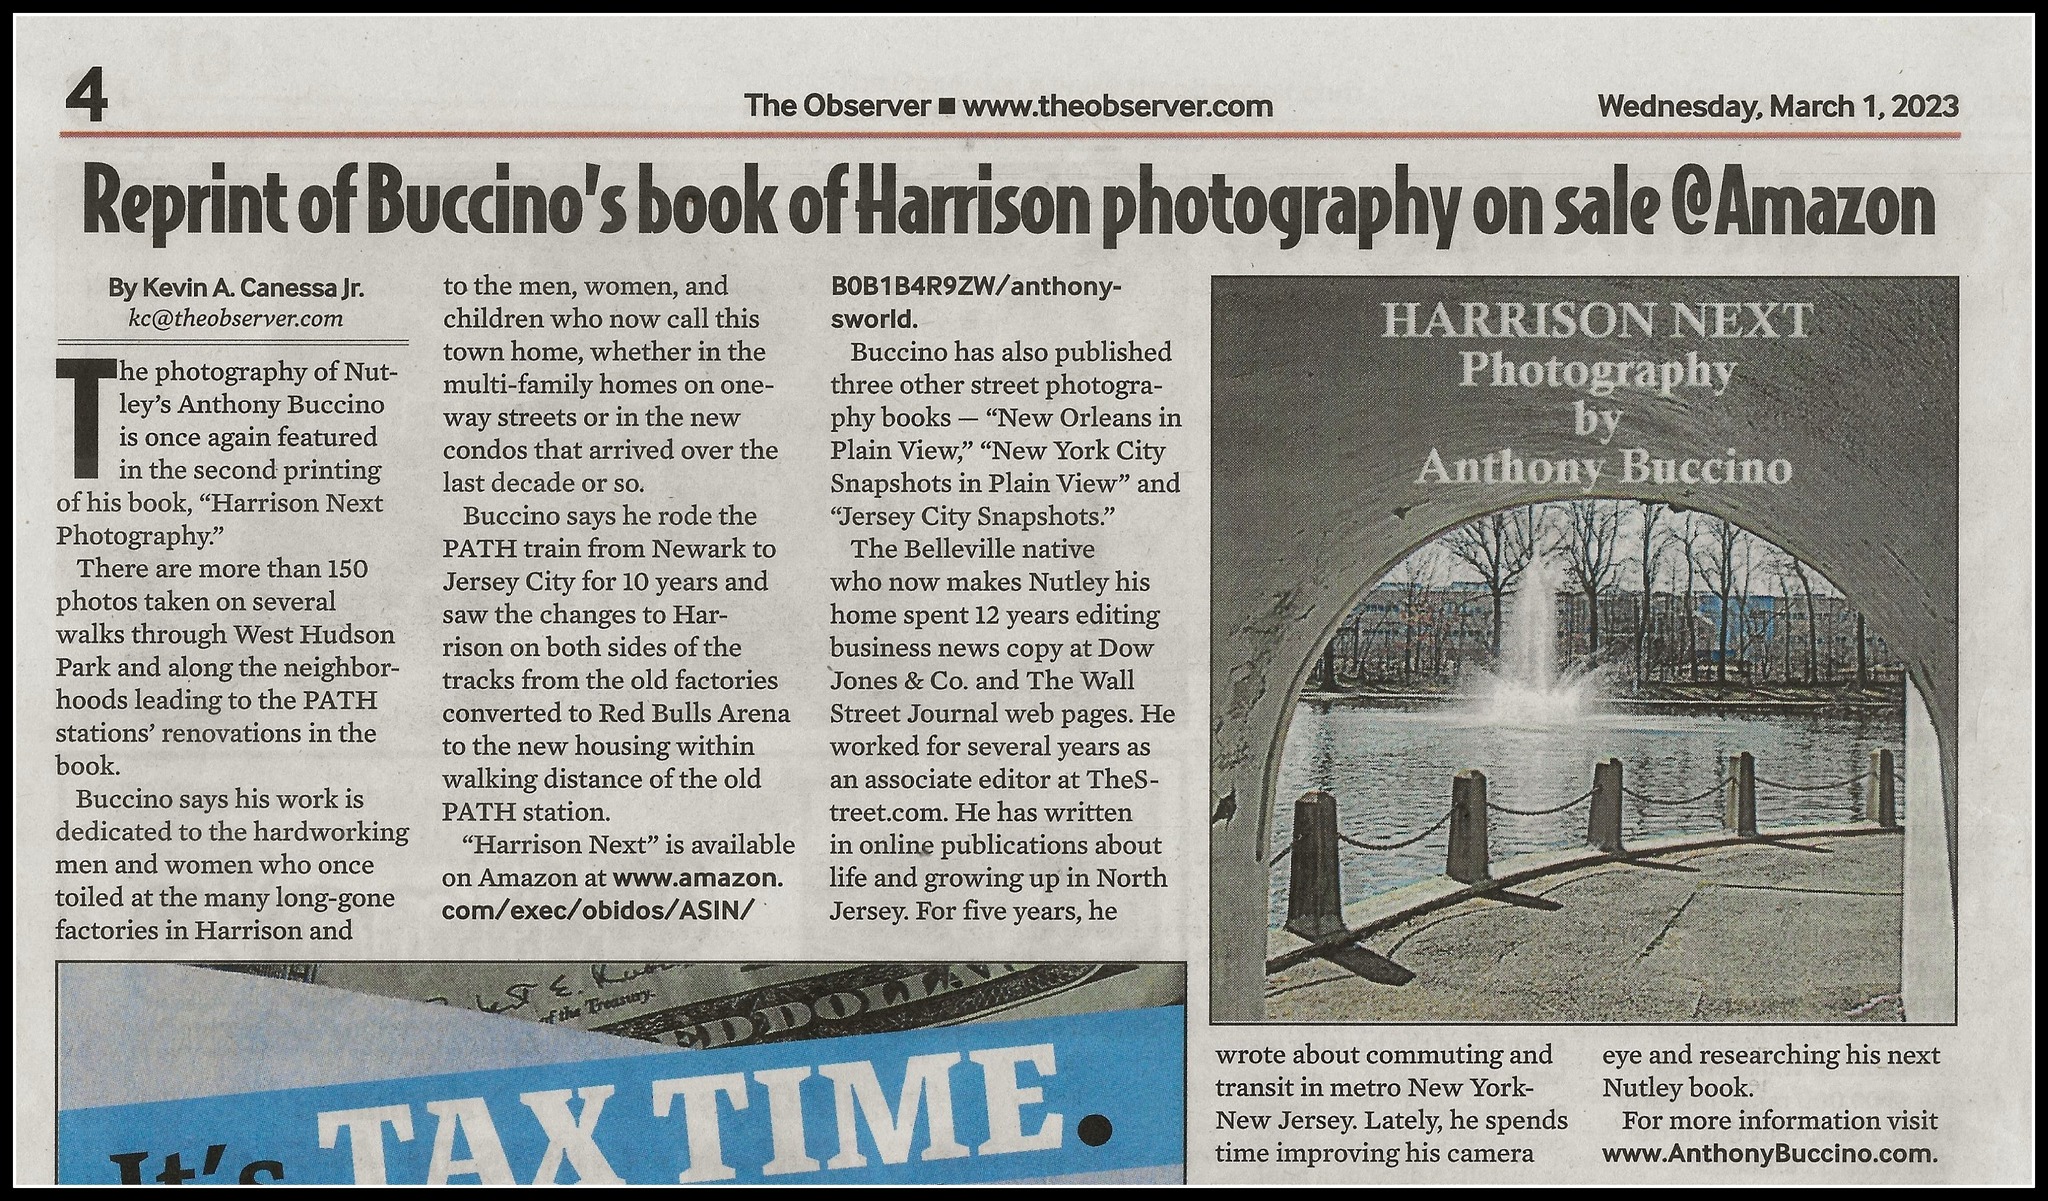 Observer Newspaper- Kevin Canessa - HARRISON NEXT Photography by Anthony Buccino 